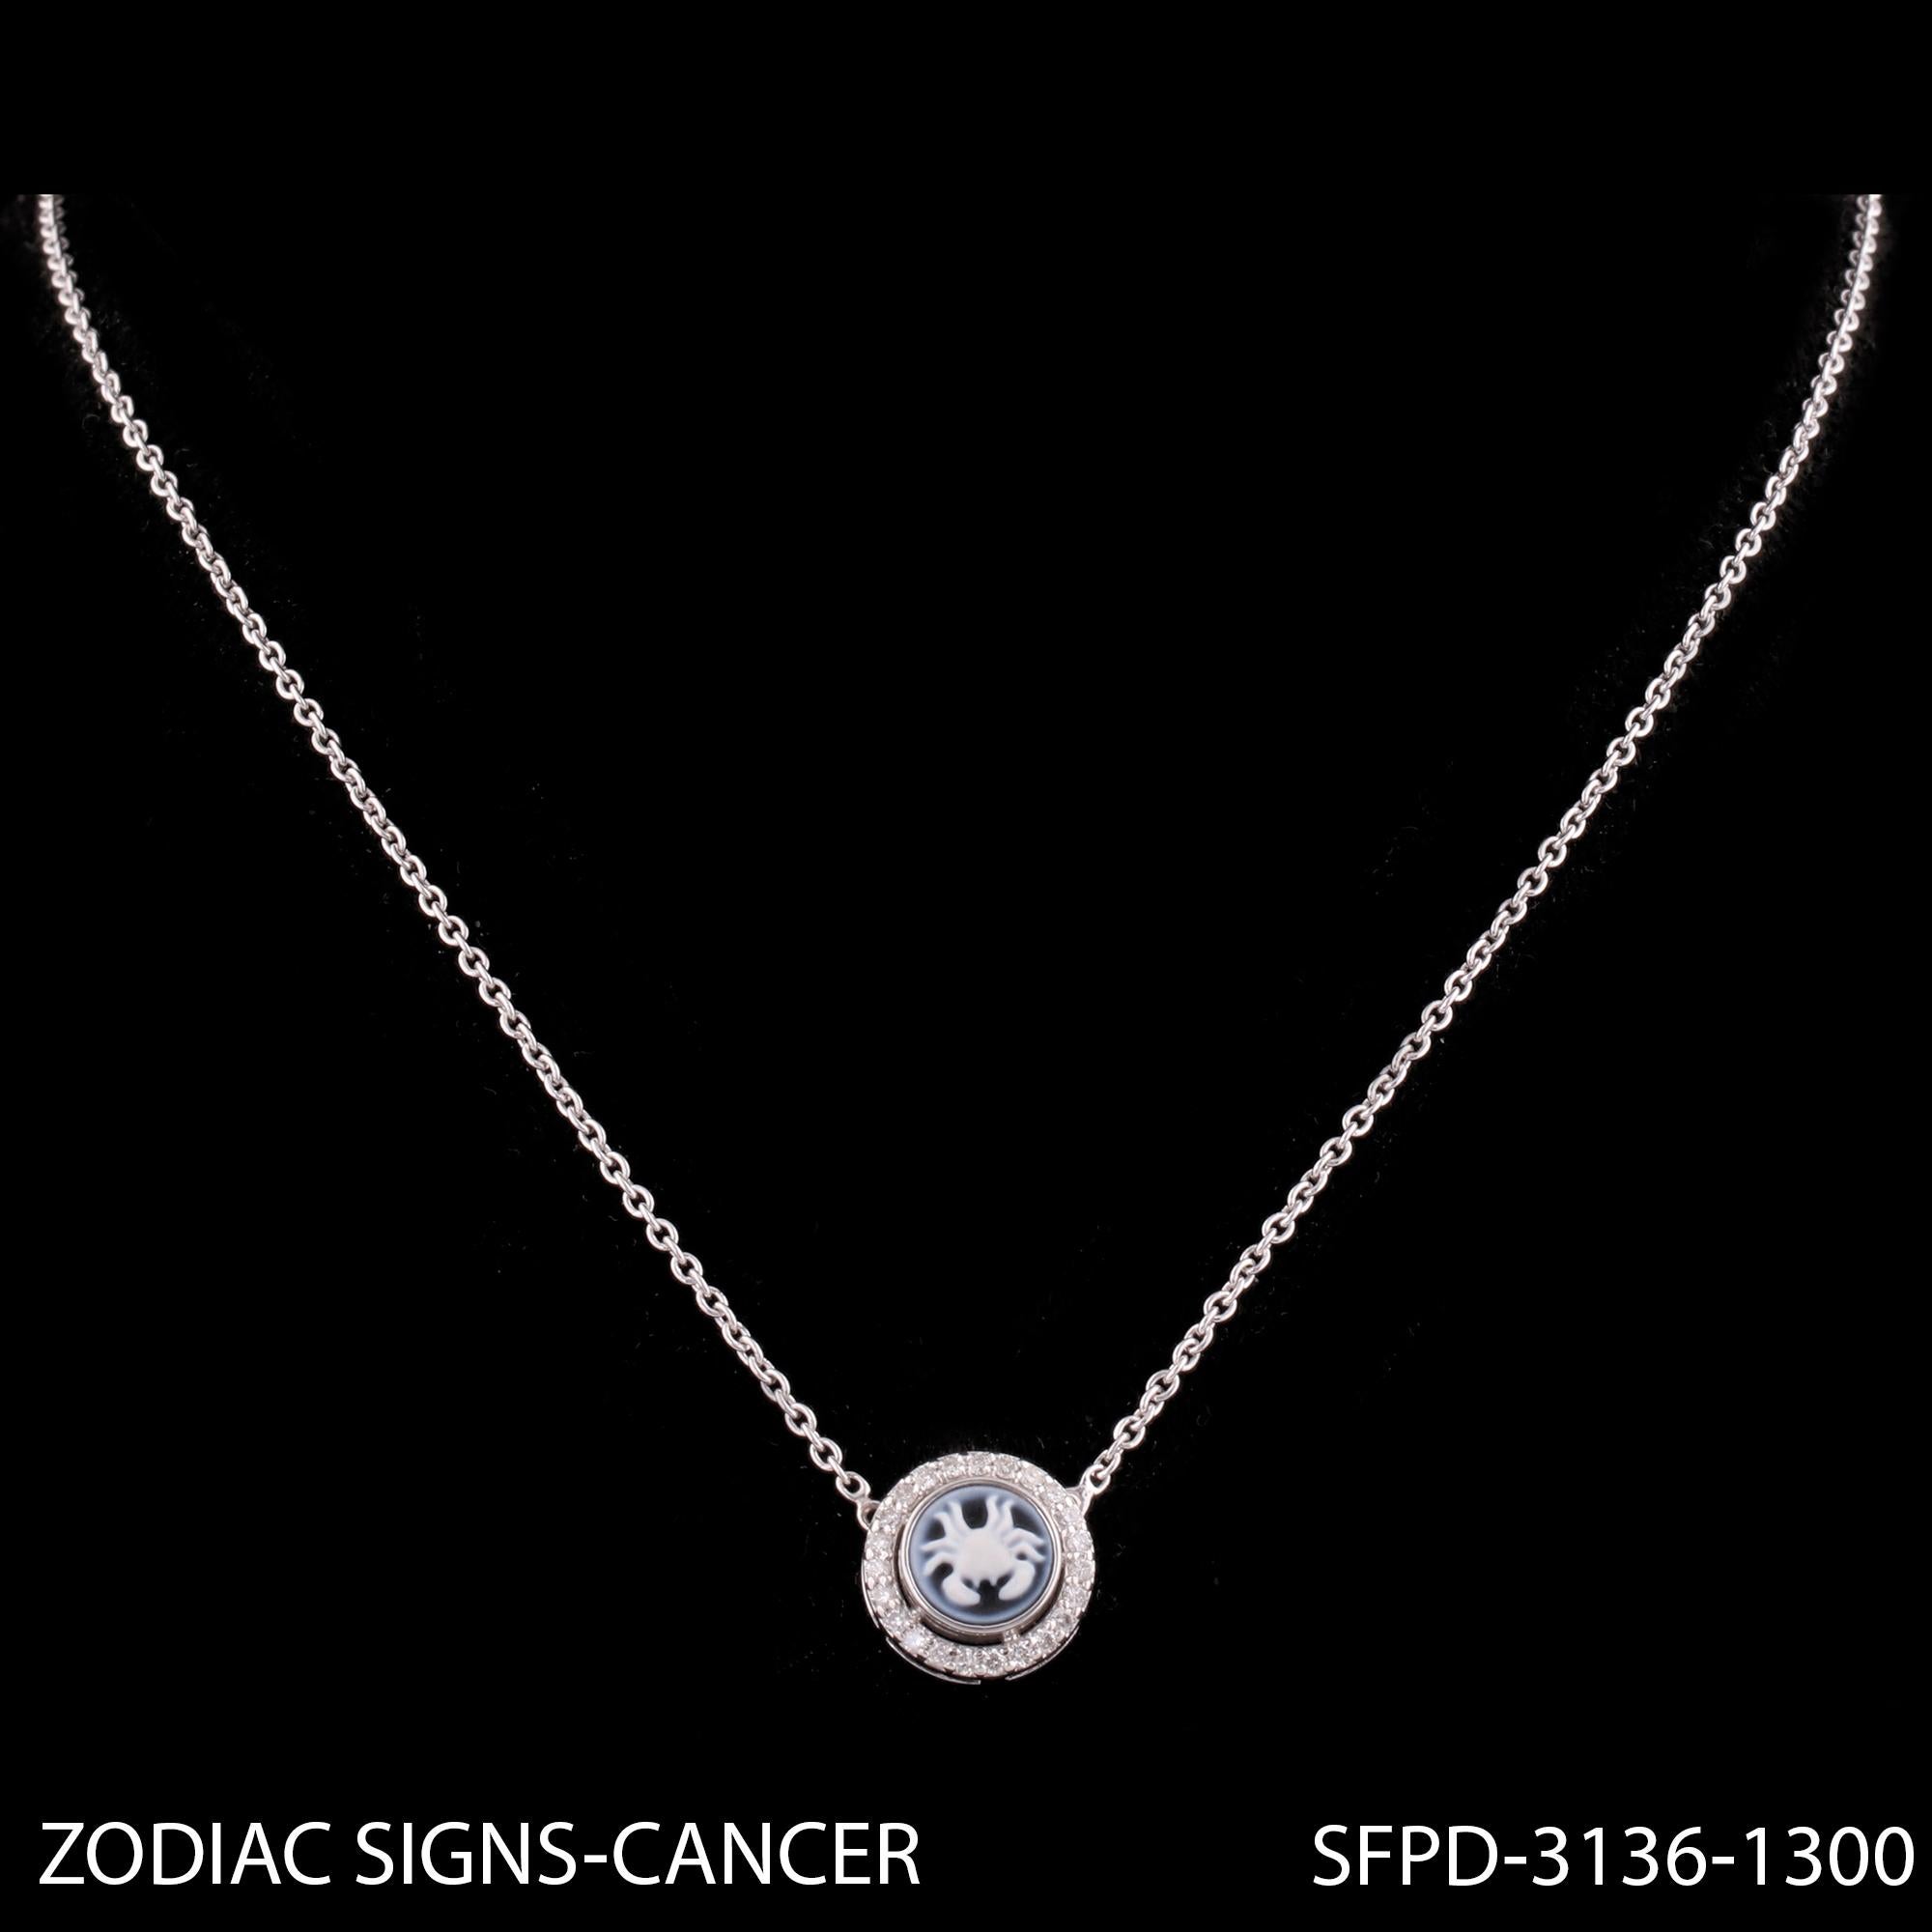 Cancer Zodiac Sign H/SI Diamond Astrological Pendant 14k White Gold Necklace For Sale 1